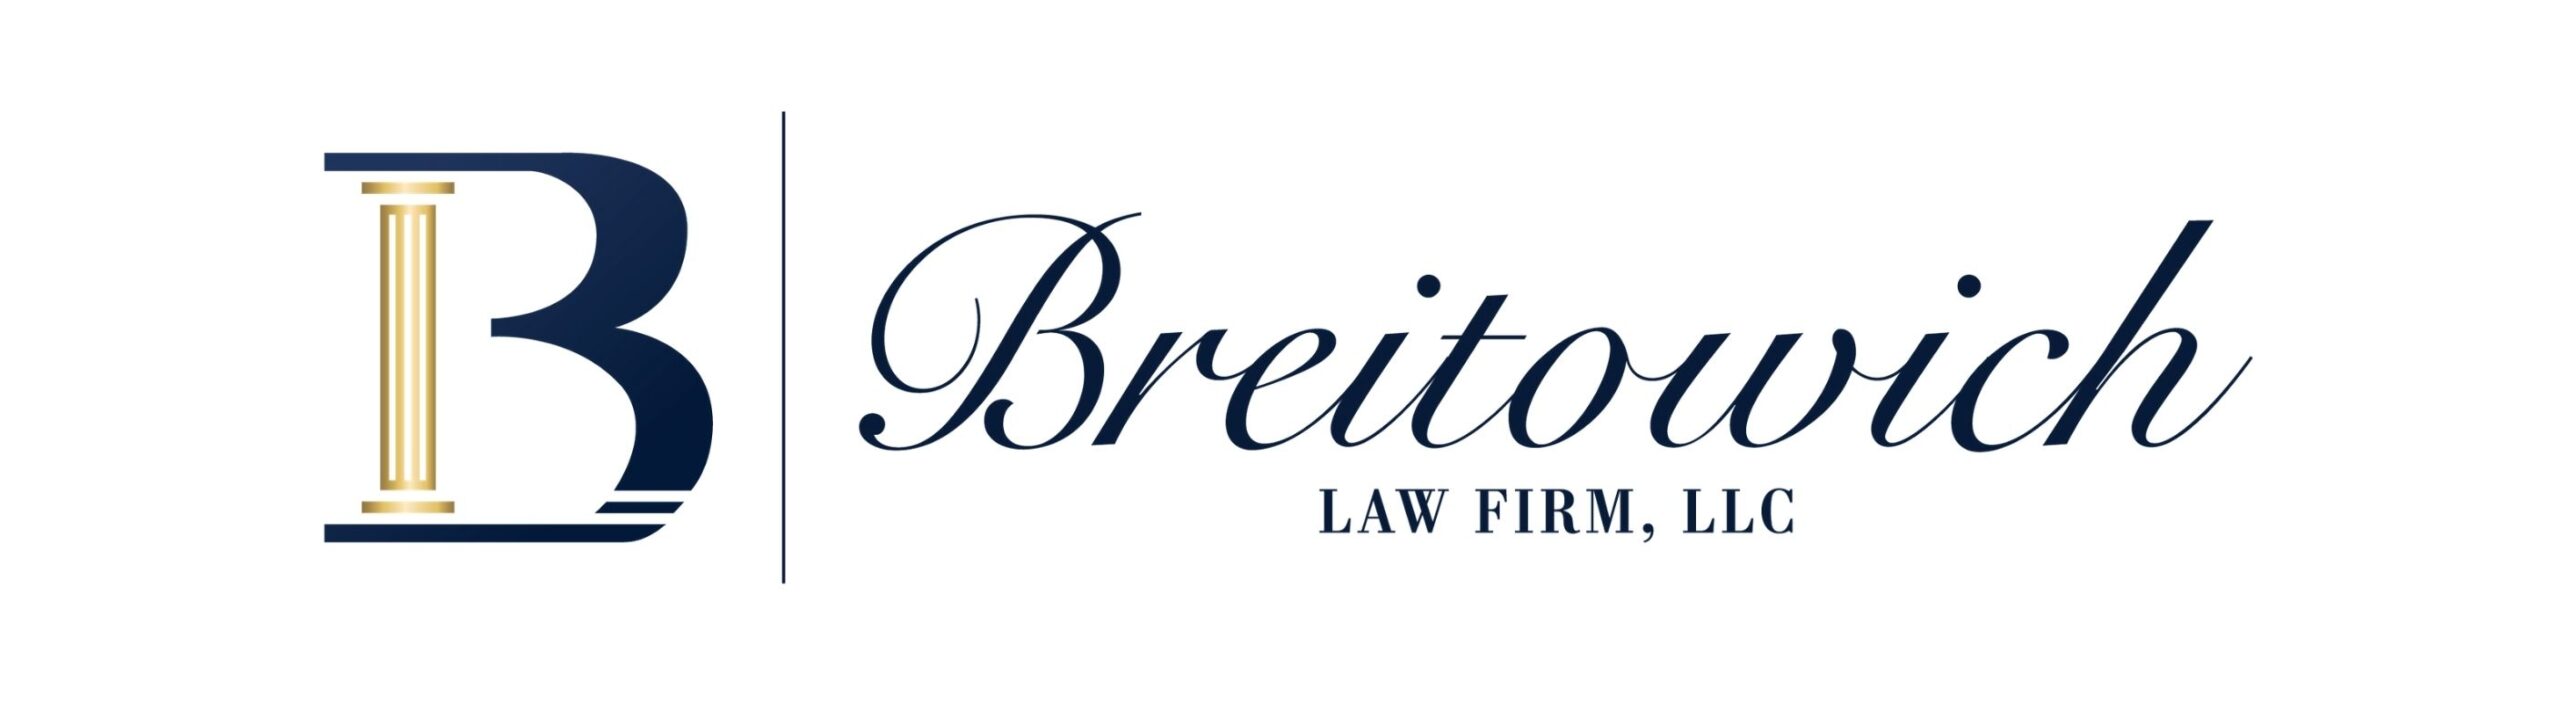 Breitowich Law Firm full logo in color, white background